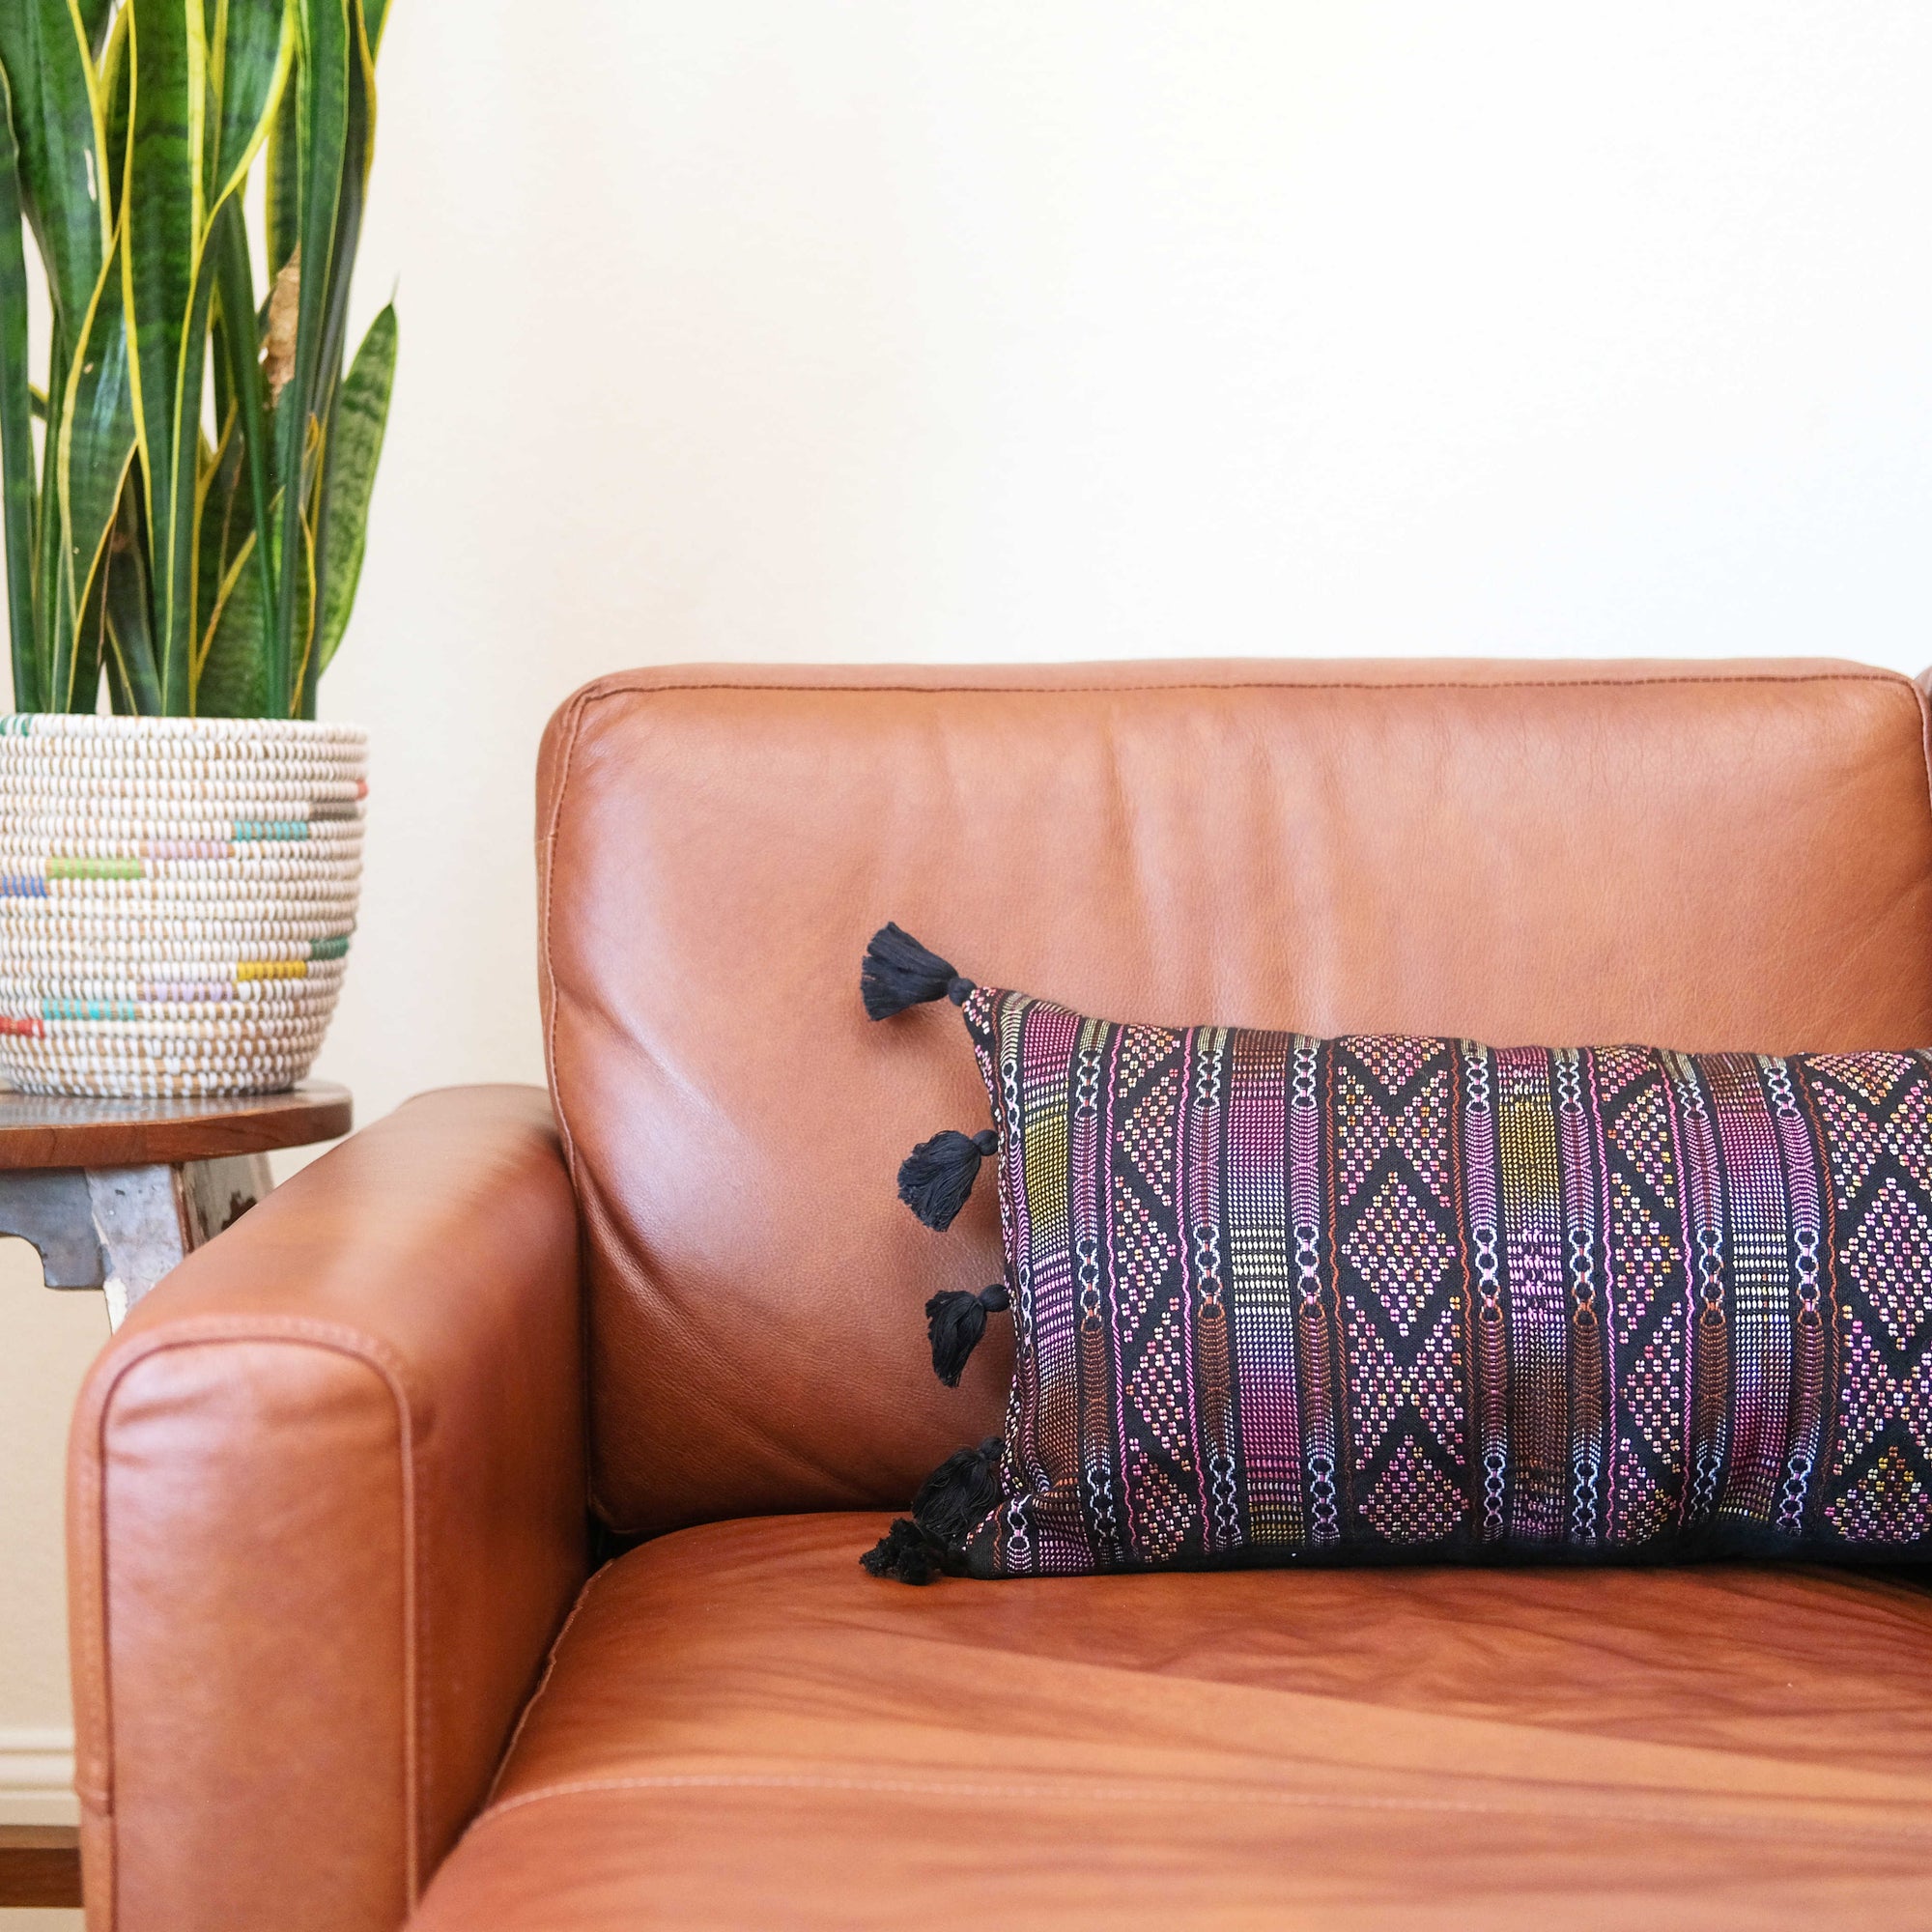 Discover the Growing Wholesale Collection of Guatemalan Artisan Pillows by UPAVIM Crafts